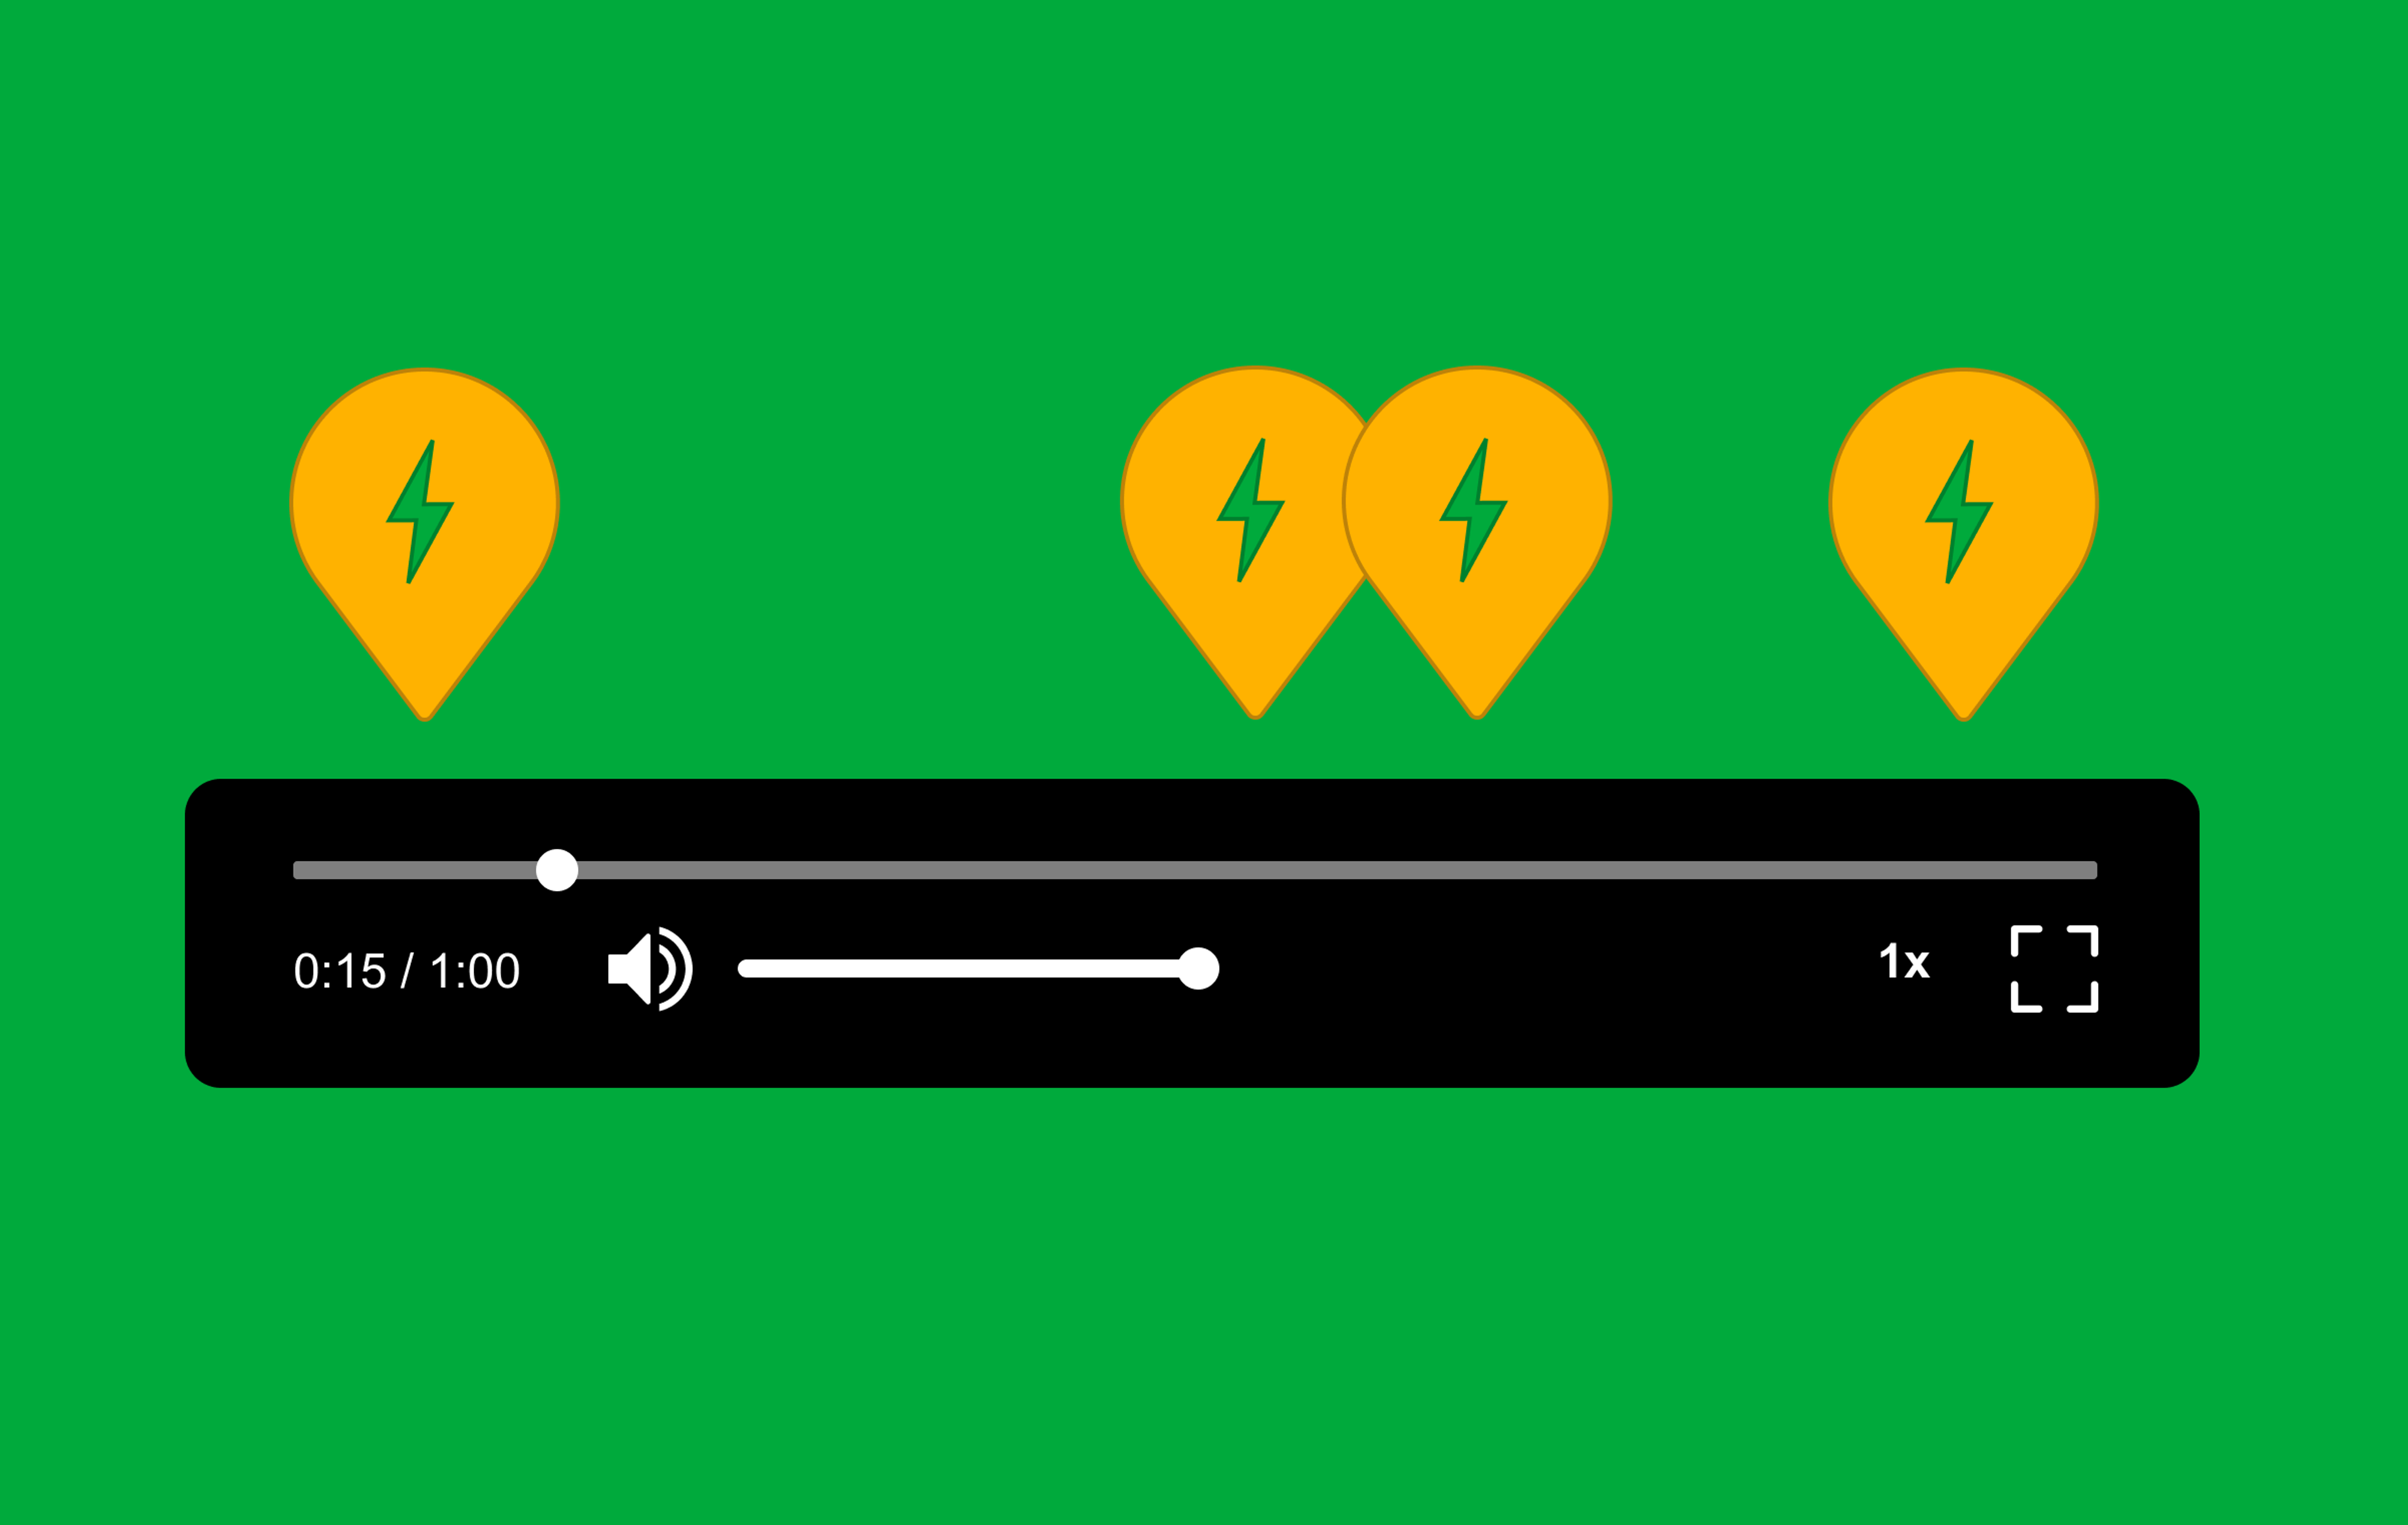 A graphic design that show a video player control bar. Hovering over the timeline are markers containing lightning bolts, depicting events occurring at specific points during the media playback.